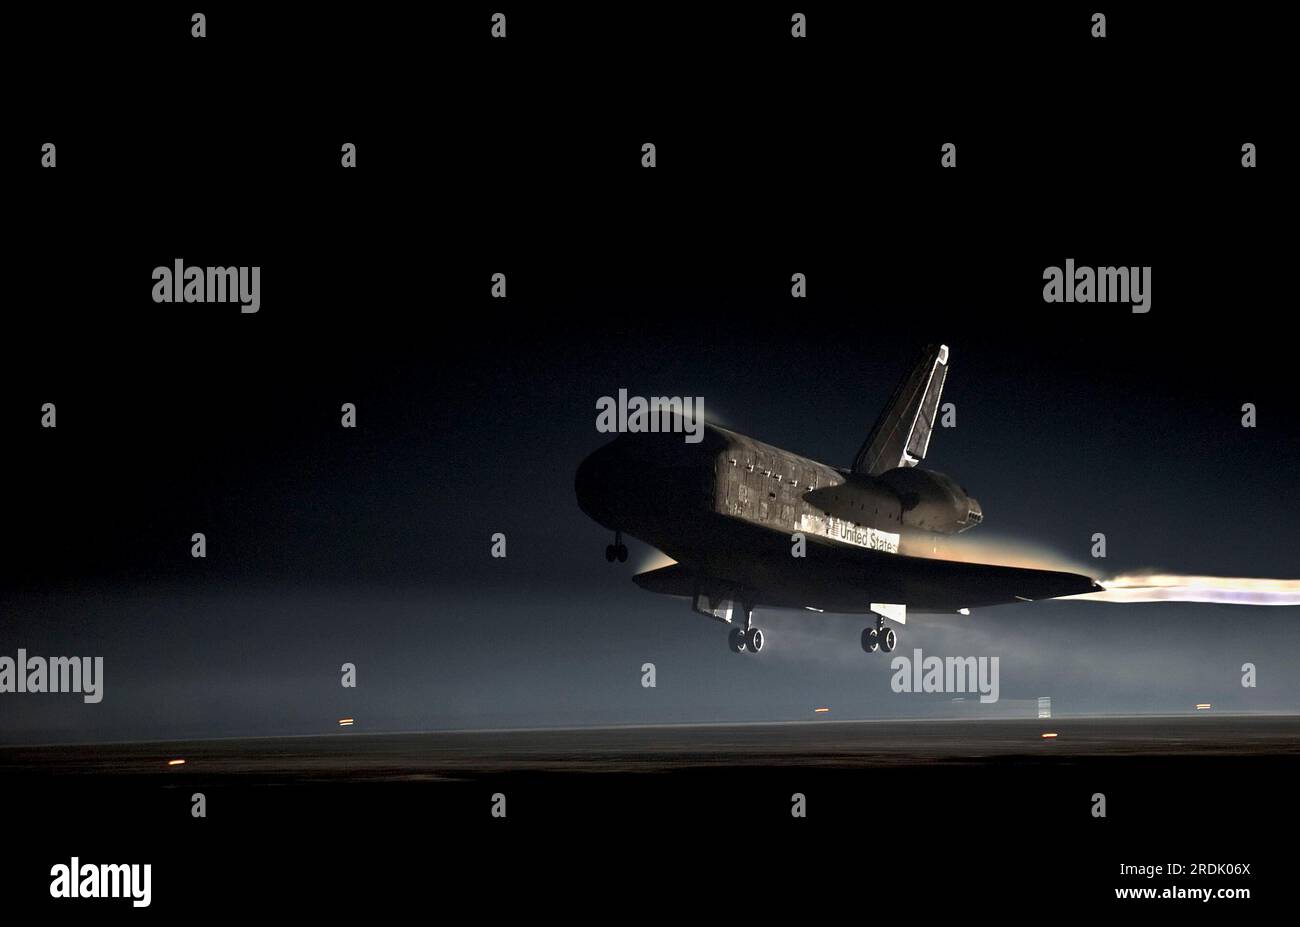 NASA's space shuttle Atlantis lands on Runway 15 at Kennedy Space Center's Shuttle Landing Facility for the final time on Thursday, July 21, 2011 in Cape Canaveral, Brevard County, FL, USA. STS-135 was the final mission for both the Atlantis orbiter and the 30-year-old space shuttle program. (Apex MediaWire Photo by Kim Shiflett/NASA) Stock Photo